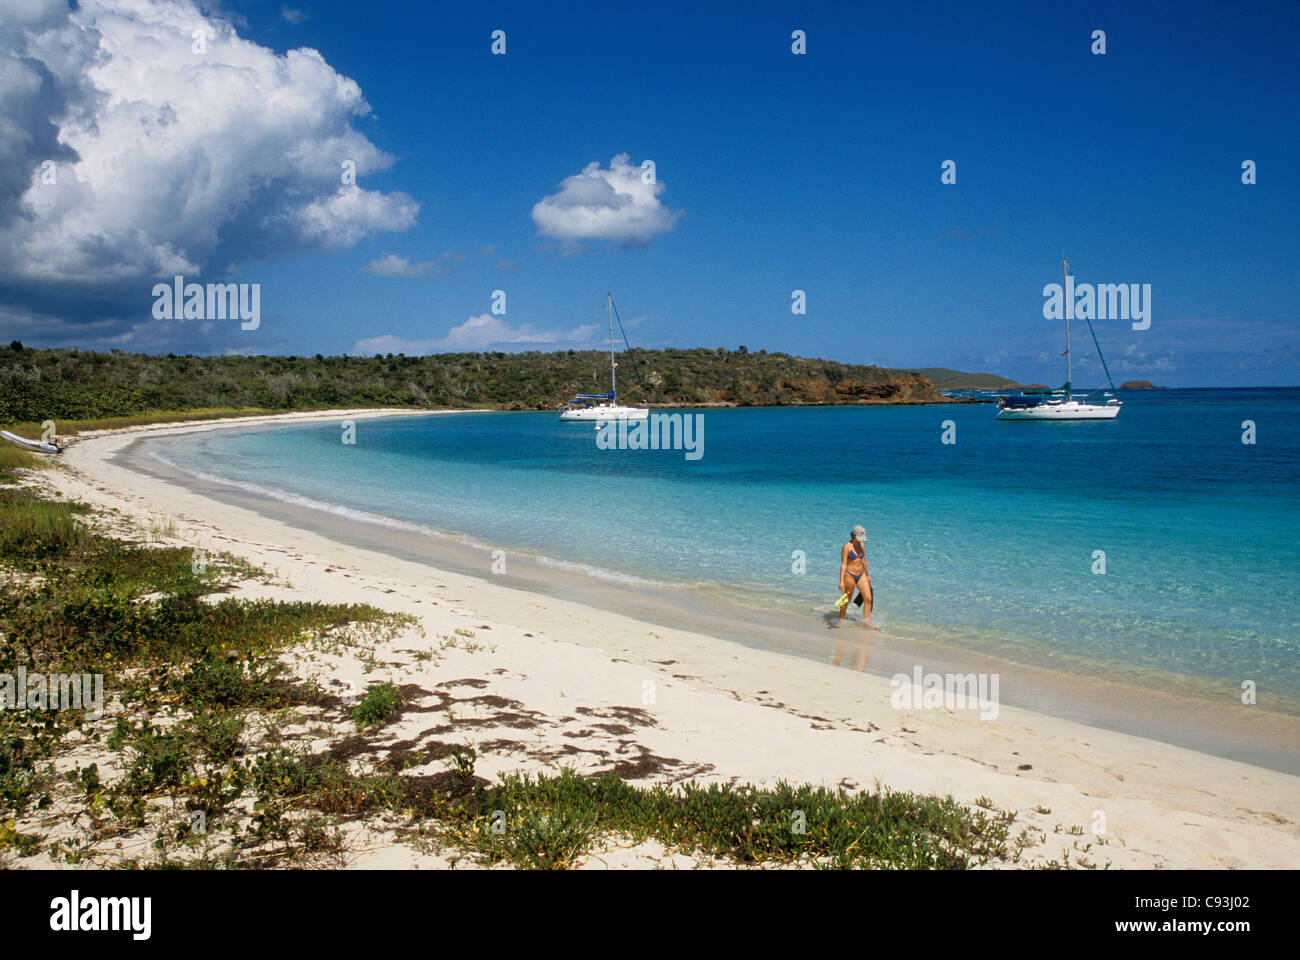 Woman with snorkeling gear walking on beach and yachts anchored in bay at Bahia des Tortugas; Culebra Island, Puerto Rico. Stock Photo